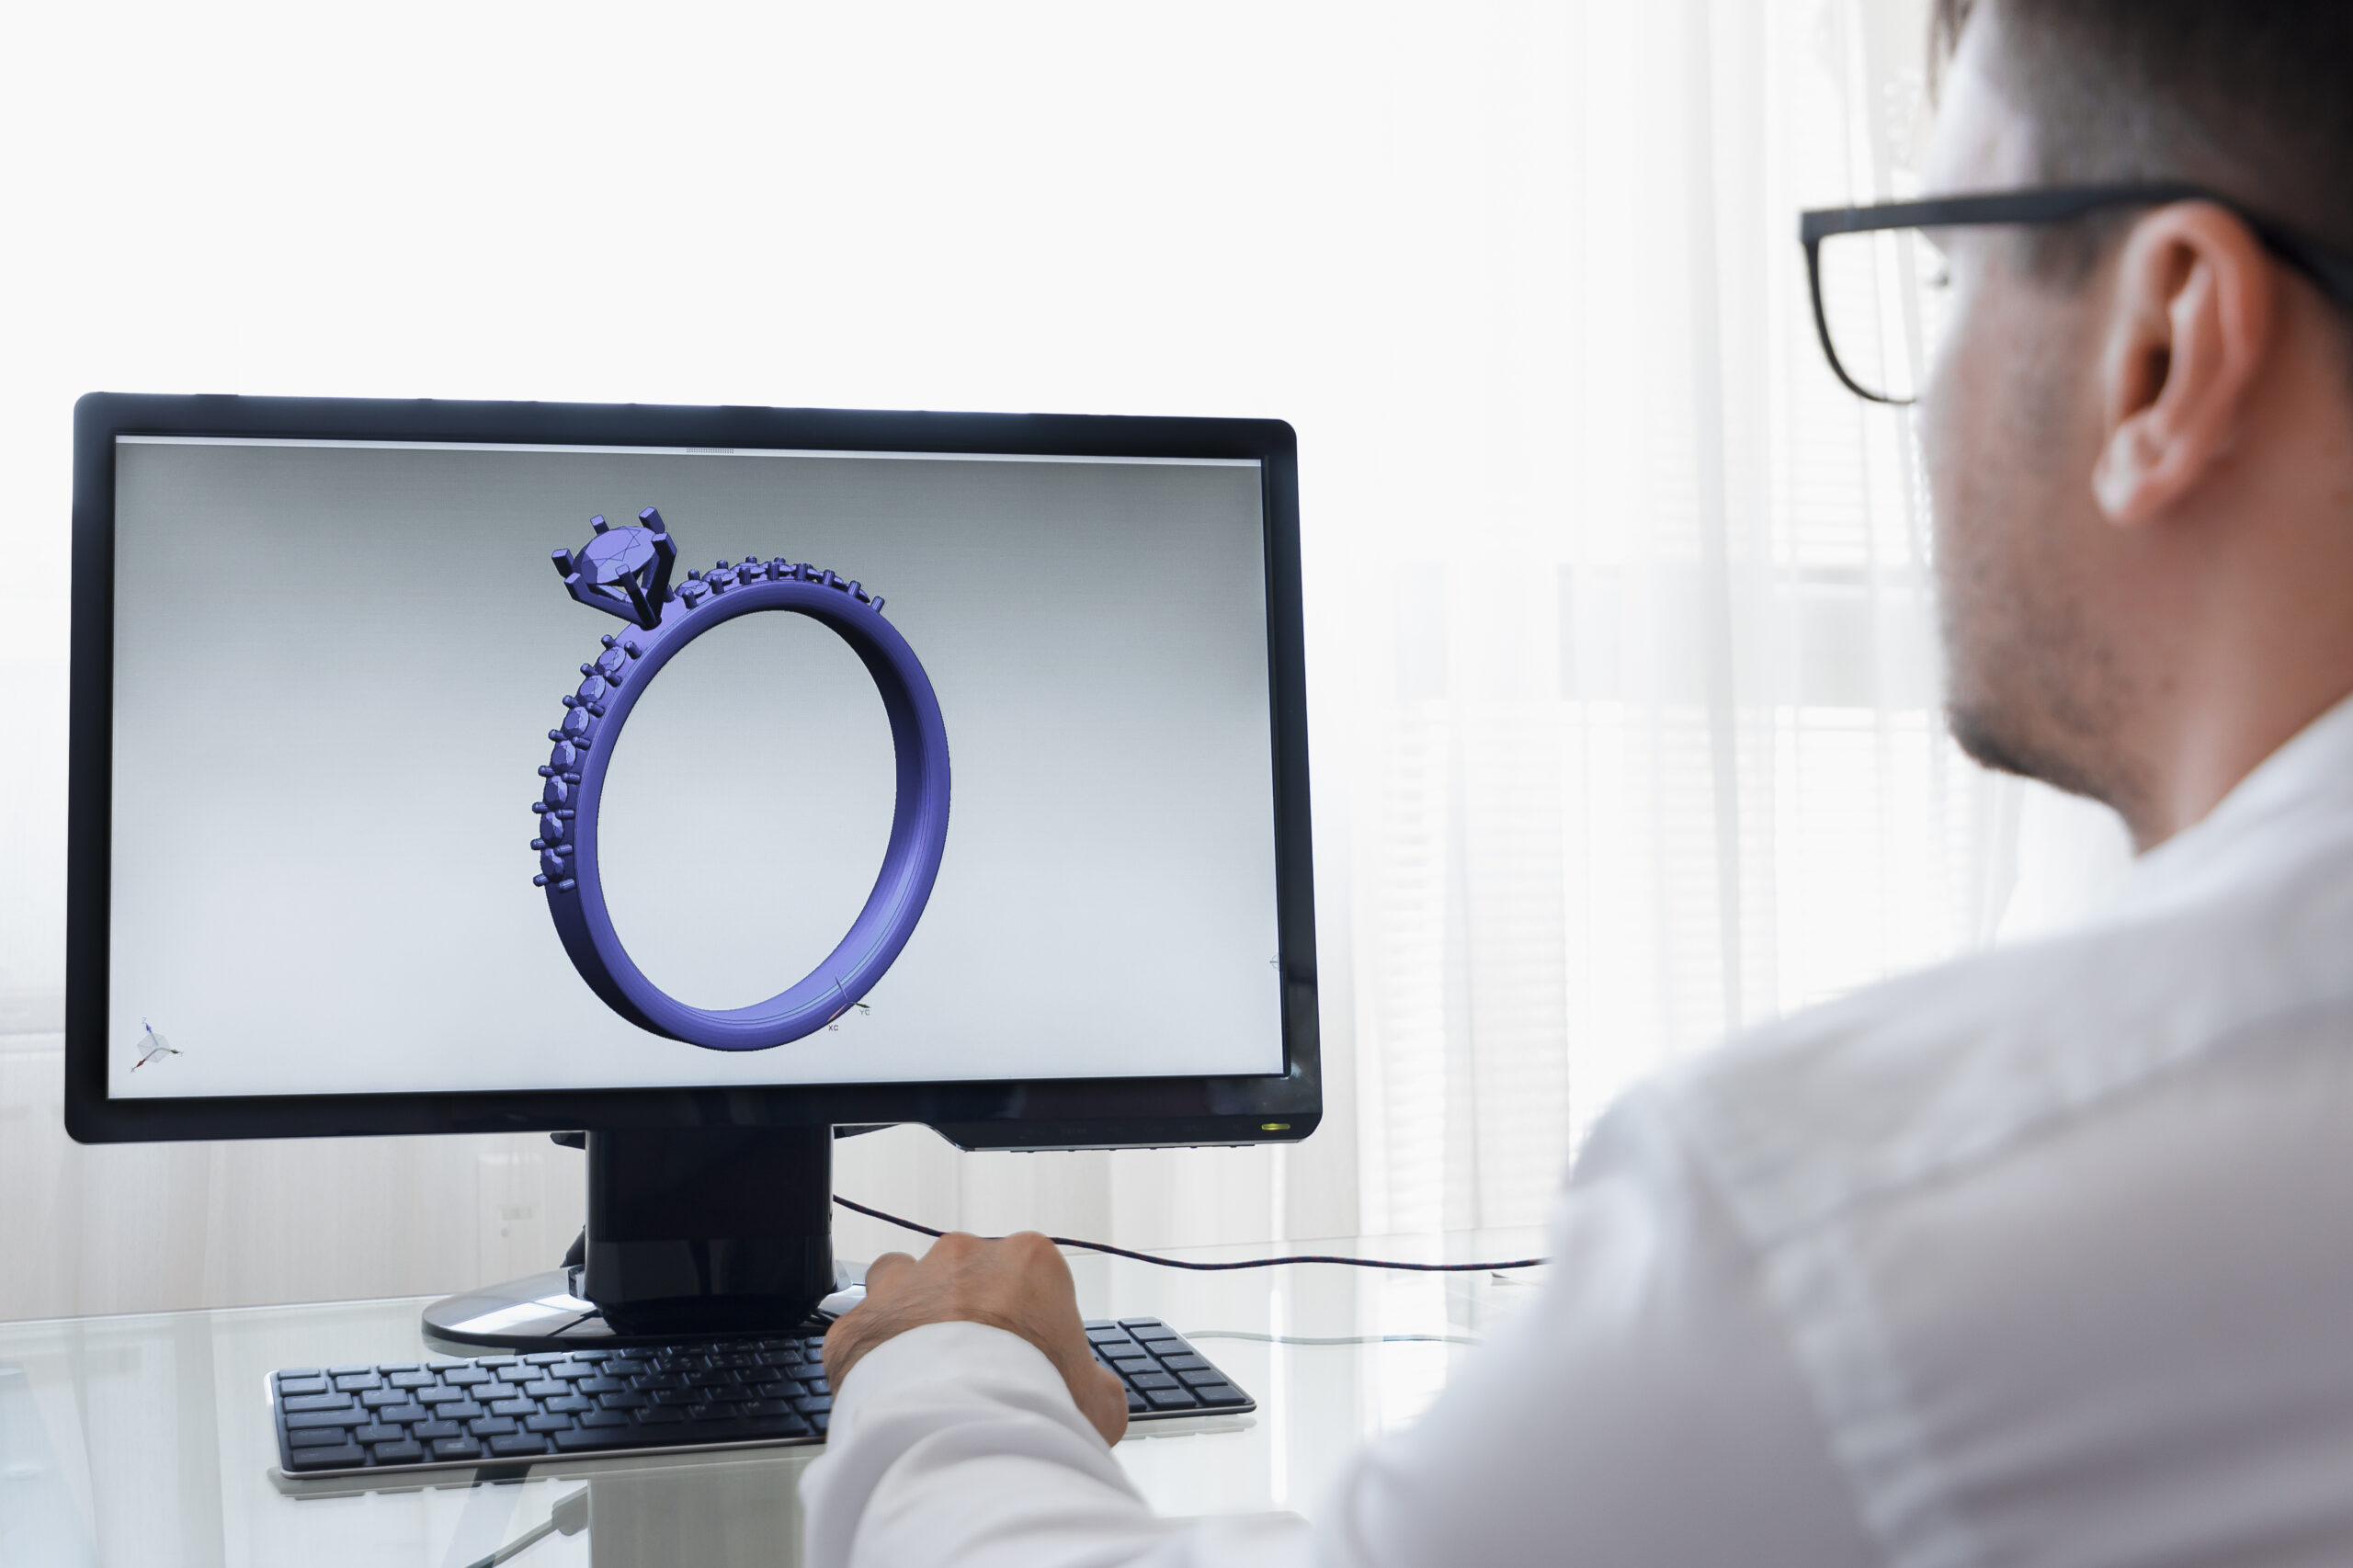 3D-Designing-a-Ring